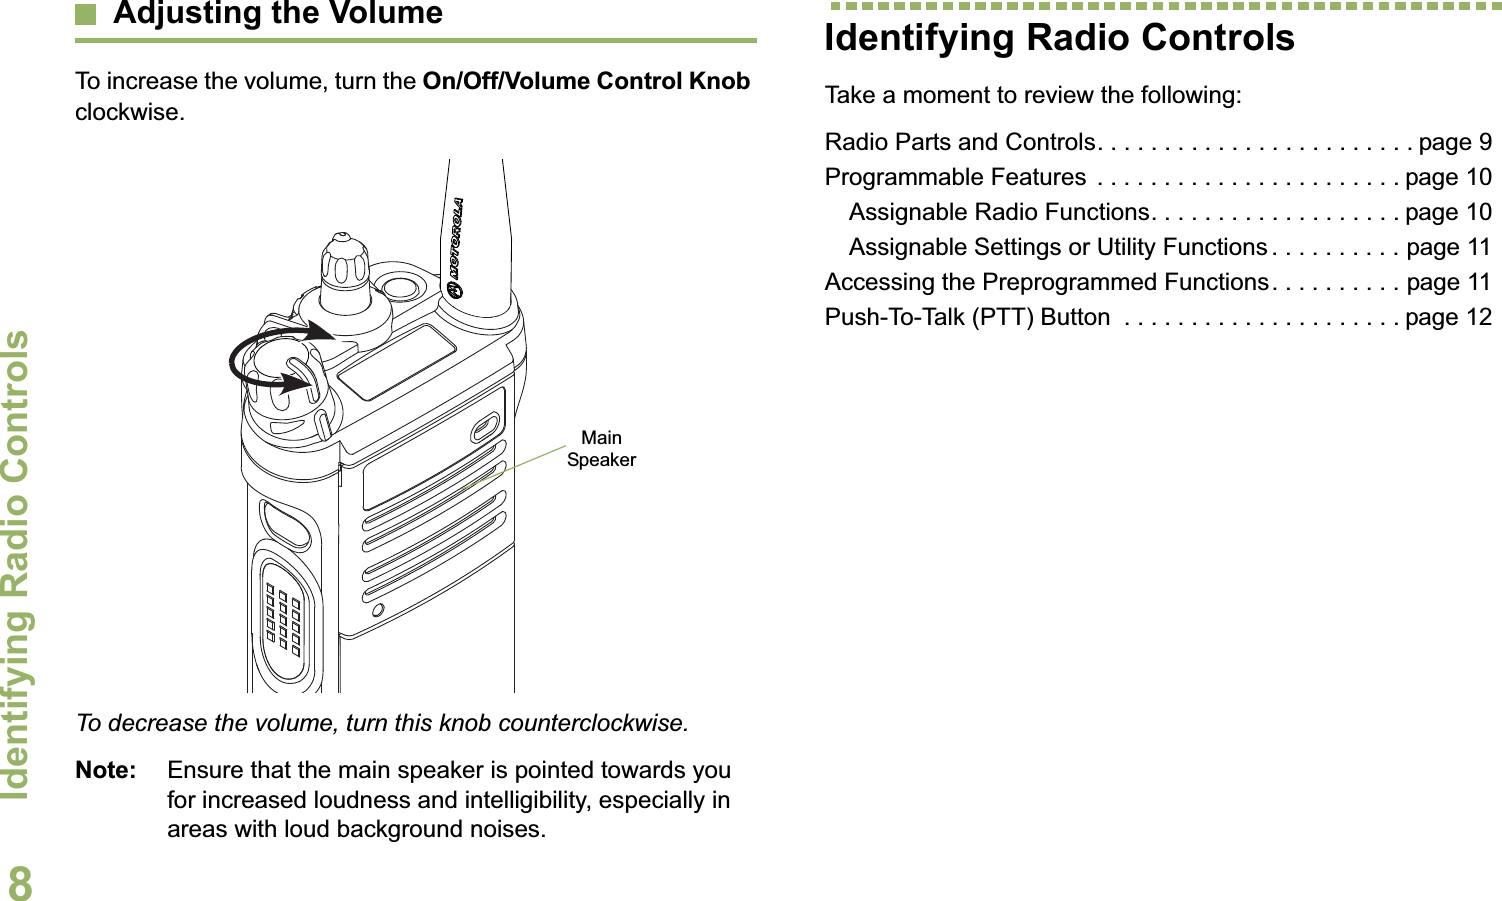 Identifying Radio ControlsEnglish8Adjusting the VolumeTo increase the volume, turn the On/Off/Volume Control Knob clockwise.To decrease the volume, turn this knob counterclockwise.Note: Ensure that the main speaker is pointed towards you for increased loudness and intelligibility, especially in areas with loud background noises.Identifying Radio ControlsTake a moment to review the following:Radio Parts and Controls. . . . . . . . . . . . . . . . . . . . . . . . page 9Programmable Features  . . . . . . . . . . . . . . . . . . . . . . . page 10Assignable Radio Functions. . . . . . . . . . . . . . . . . . . page 10Assignable Settings or Utility Functions . . . . . . . . . . page 11Accessing the Preprogrammed Functions. . . . . . . . . . page 11Push-To-Talk (PTT) Button  . . . . . . . . . . . . . . . . . . . . . page 12Main Speaker